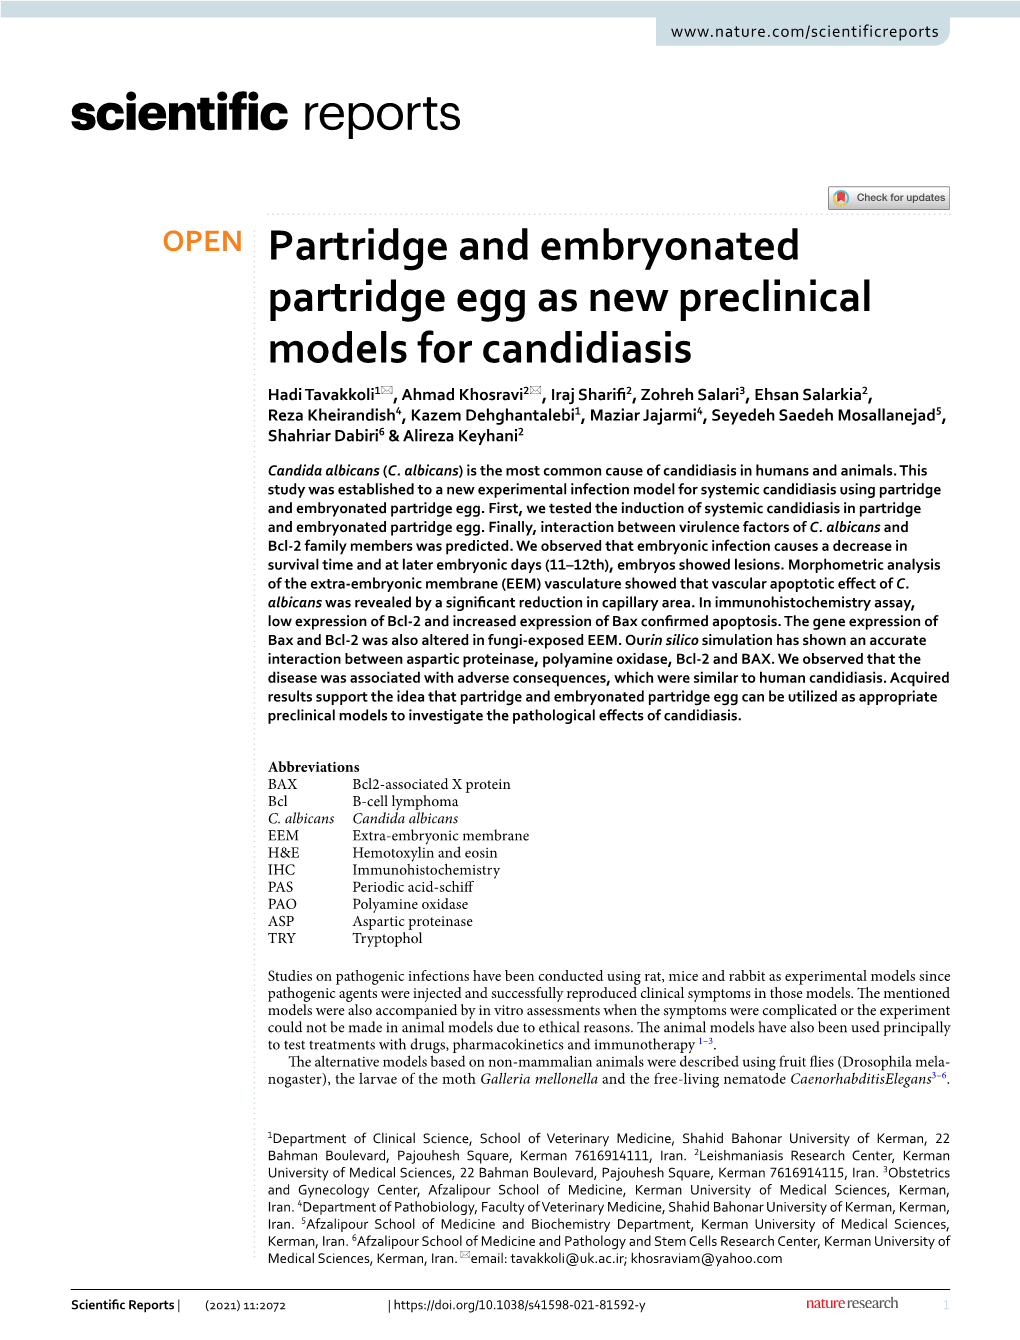 Partridge and Embryonated Partridge Egg As New Preclinical Models For